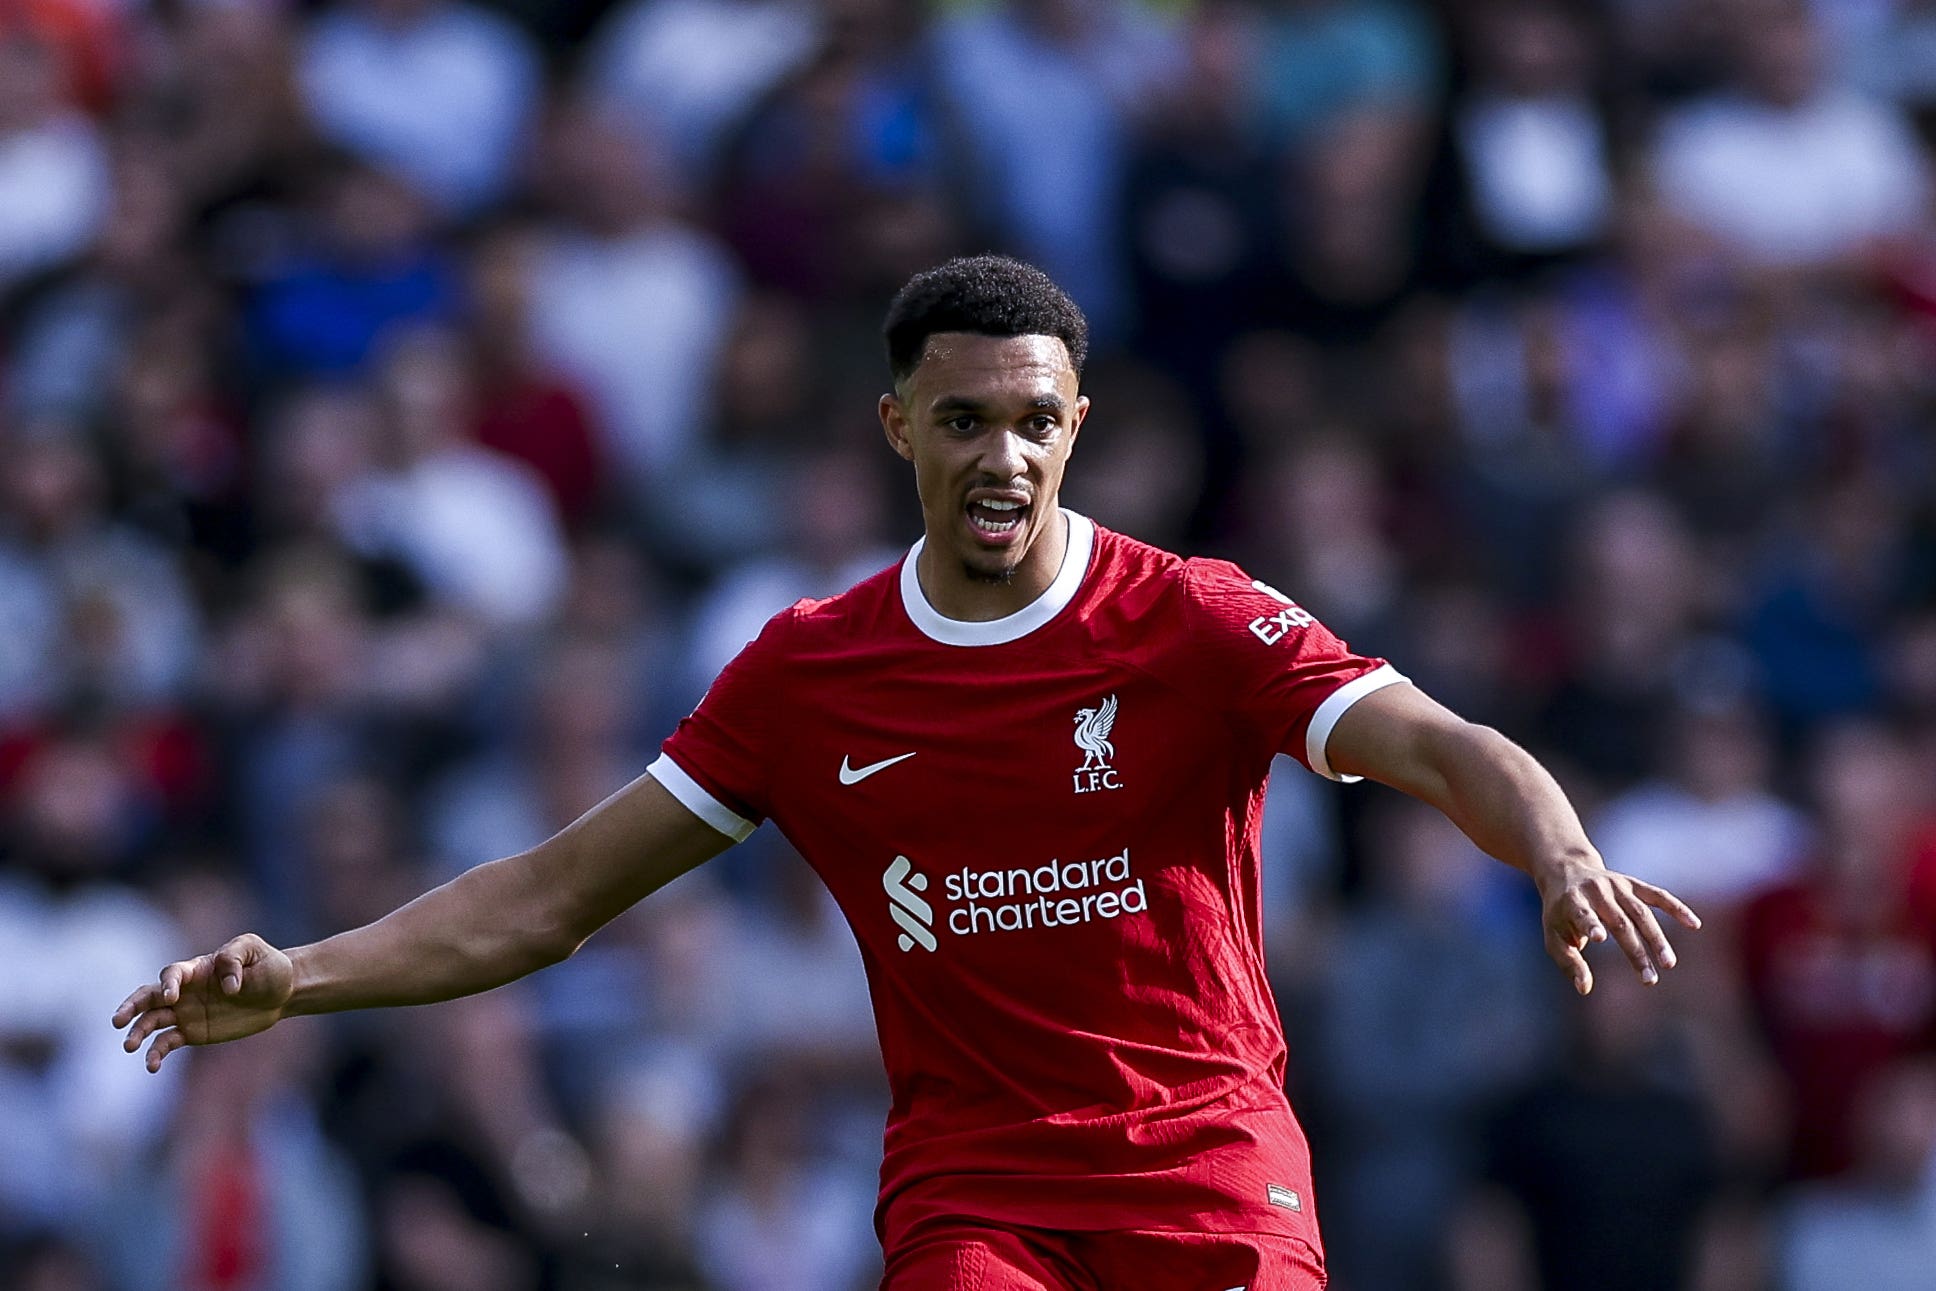 Liverpool’s Trent Alexander-Arnold will be tested by Manchester City’s Jeremy Doku